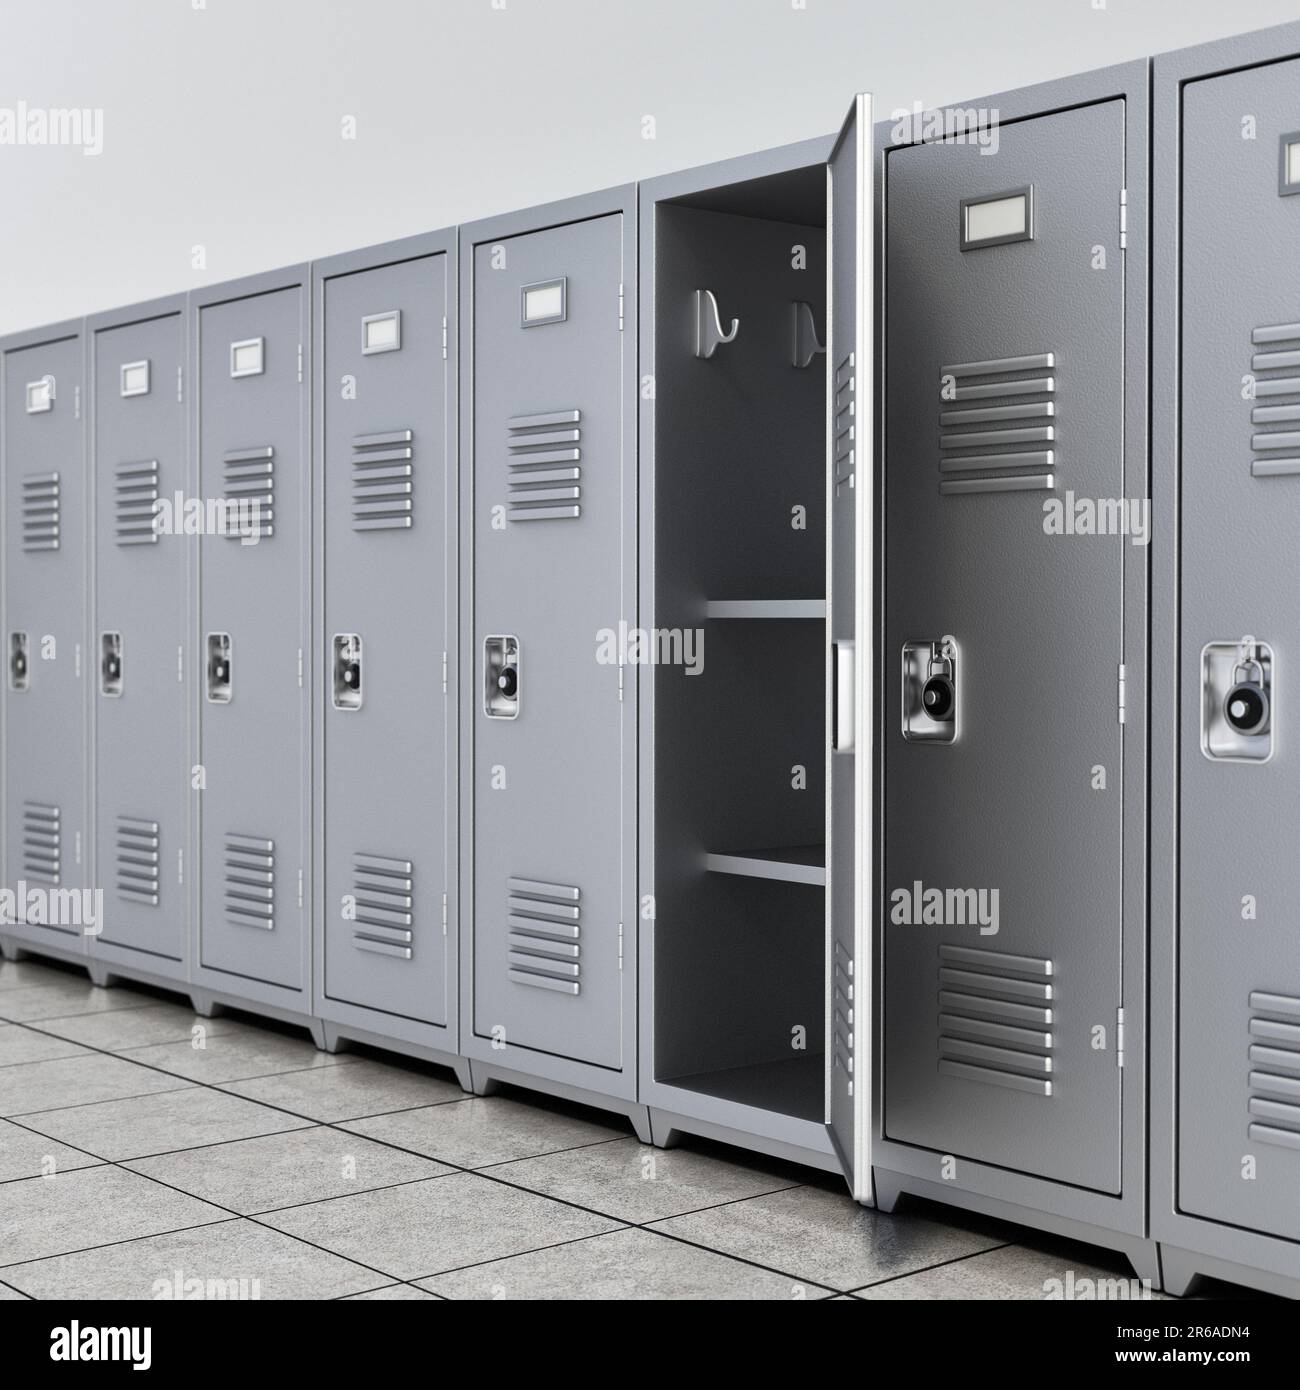 Metal locker storage cabinets for school, fitness club or gym in a row. 3D illustration. Stock Photo